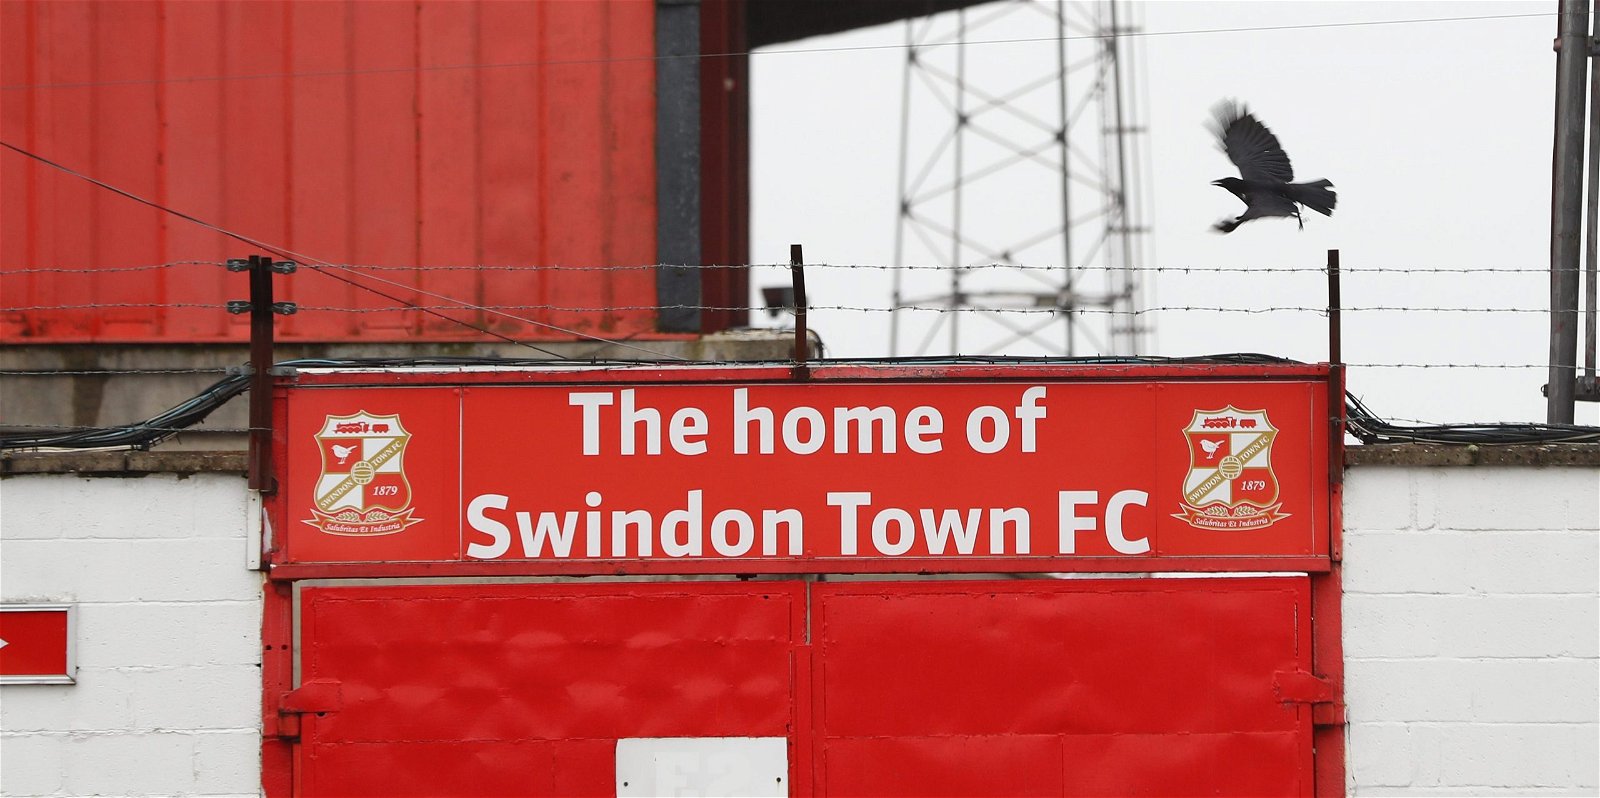 Swindon Town, Five outsiders for the Swindon Town job